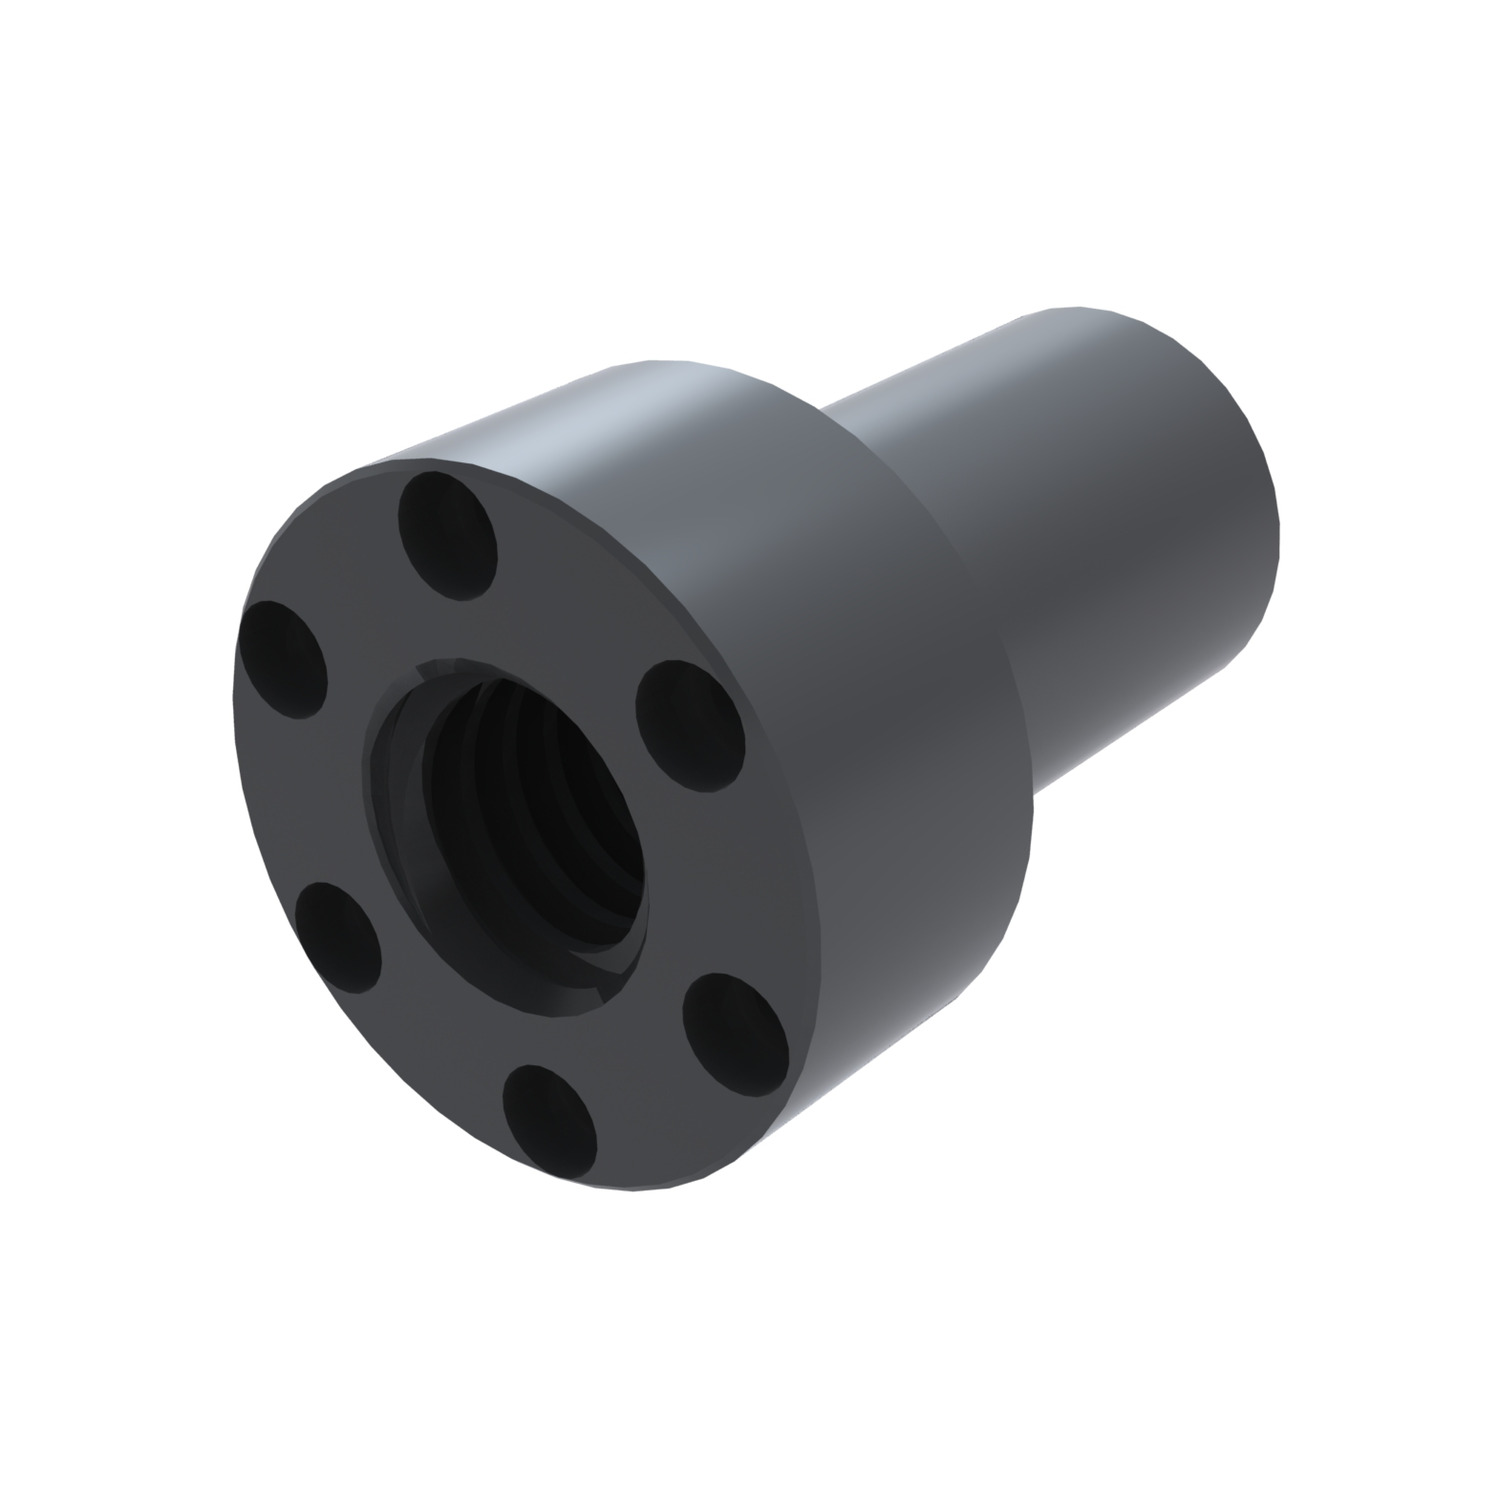 Flanged Self-Lubricating Plastic Nut Self lubricating flanged nut for trapezoidal thread.